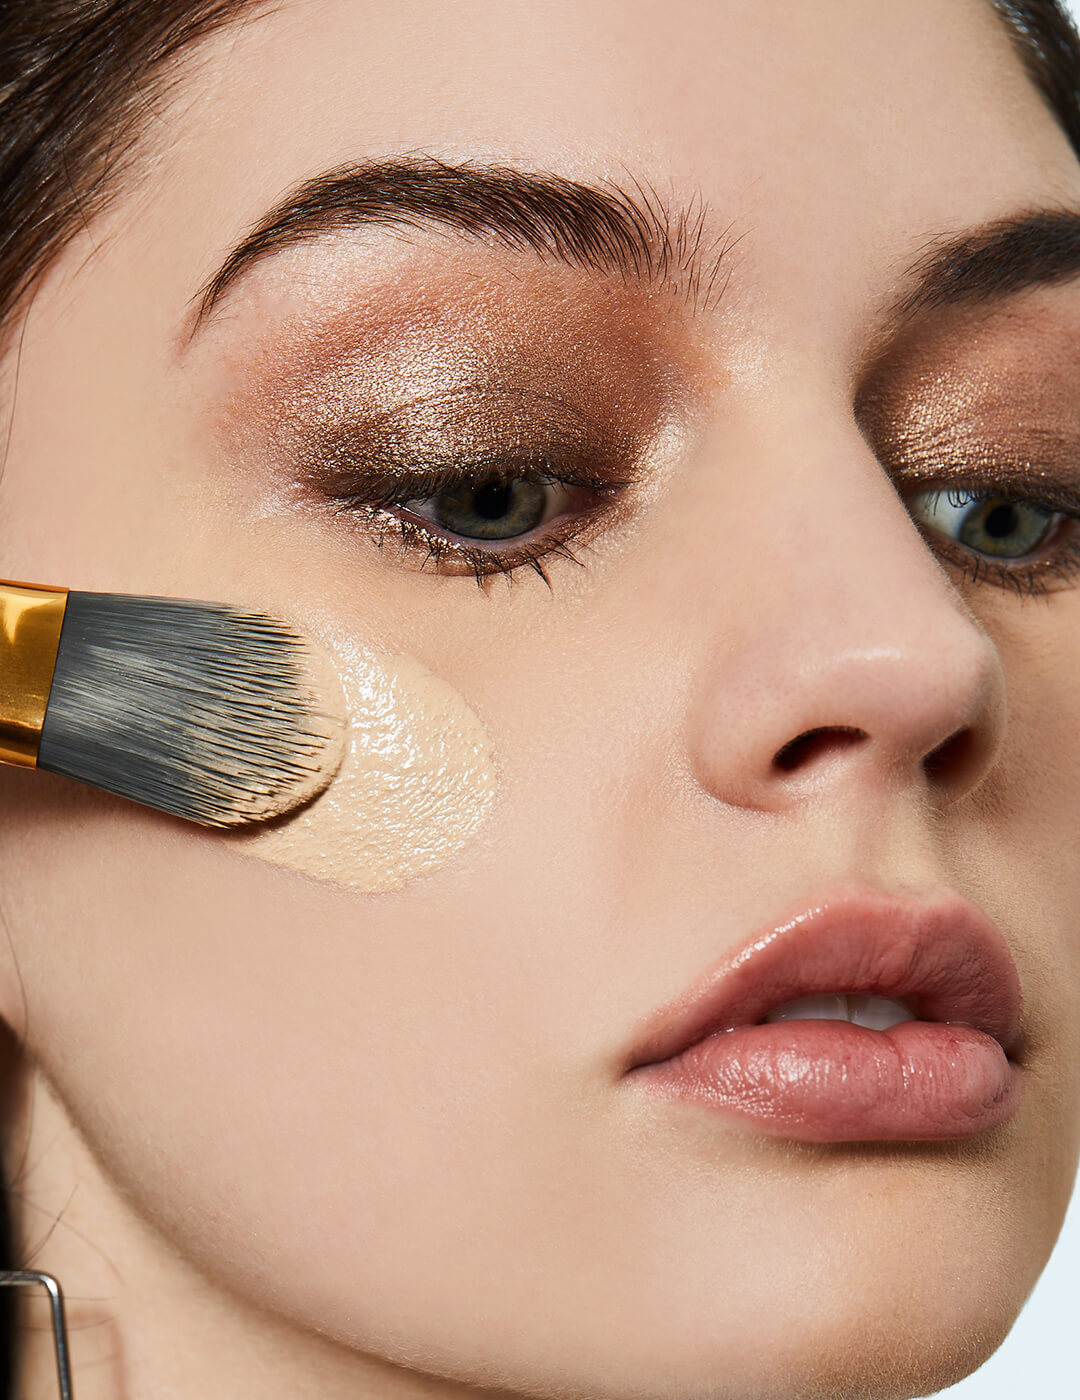 How to Get Ready for All-Day Makeup